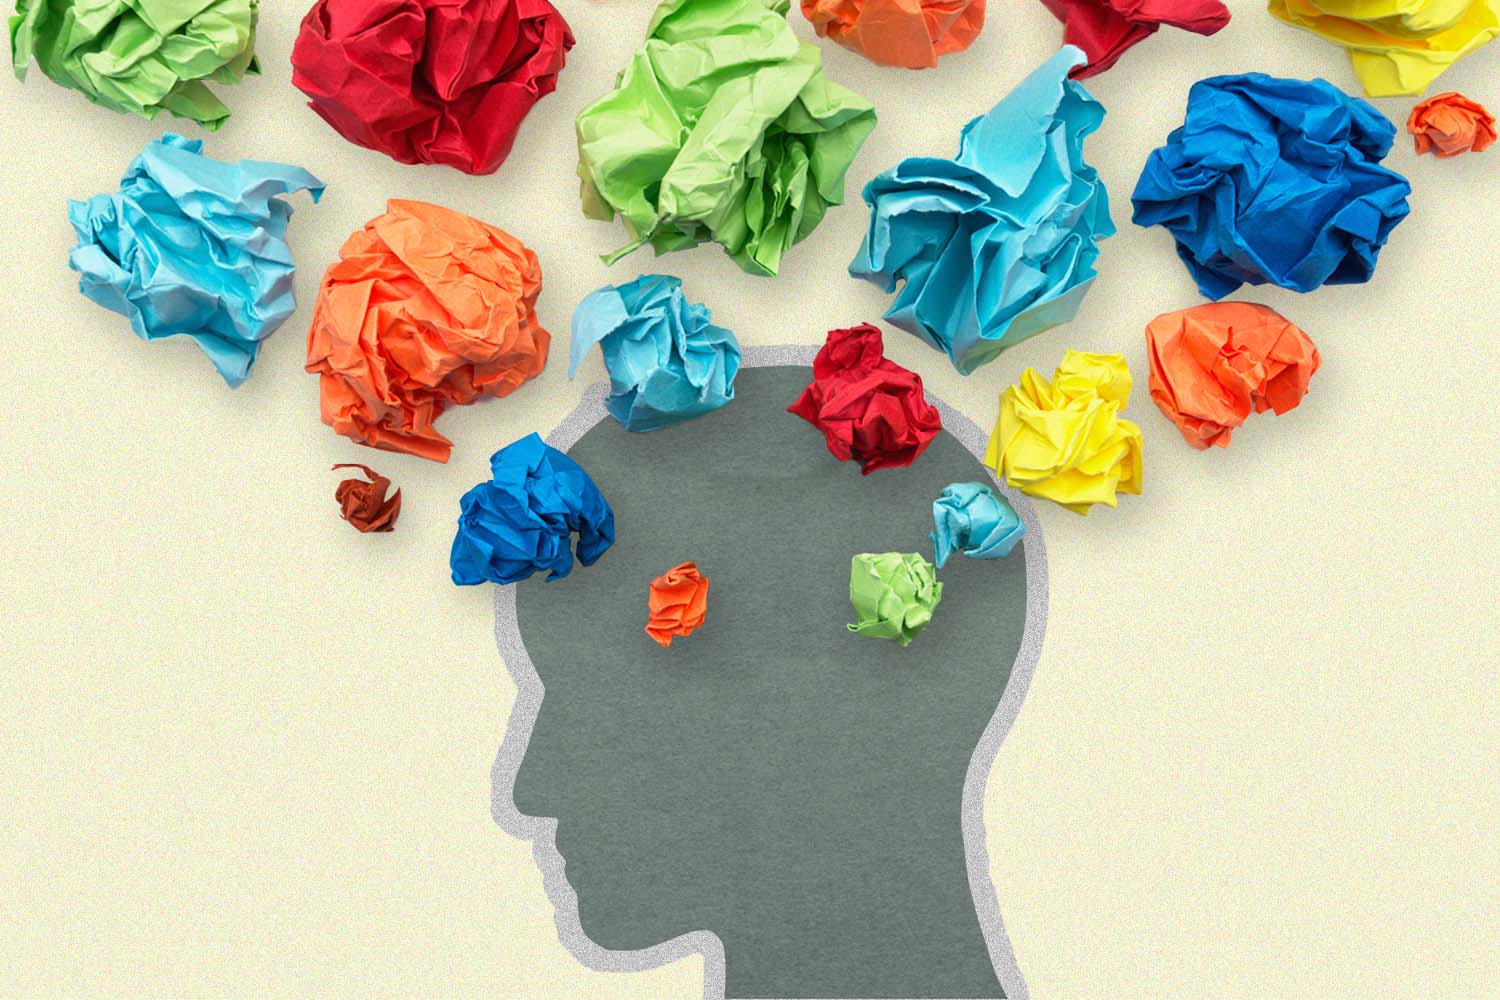 Cutout of a face, with colorful crumpled paper on top